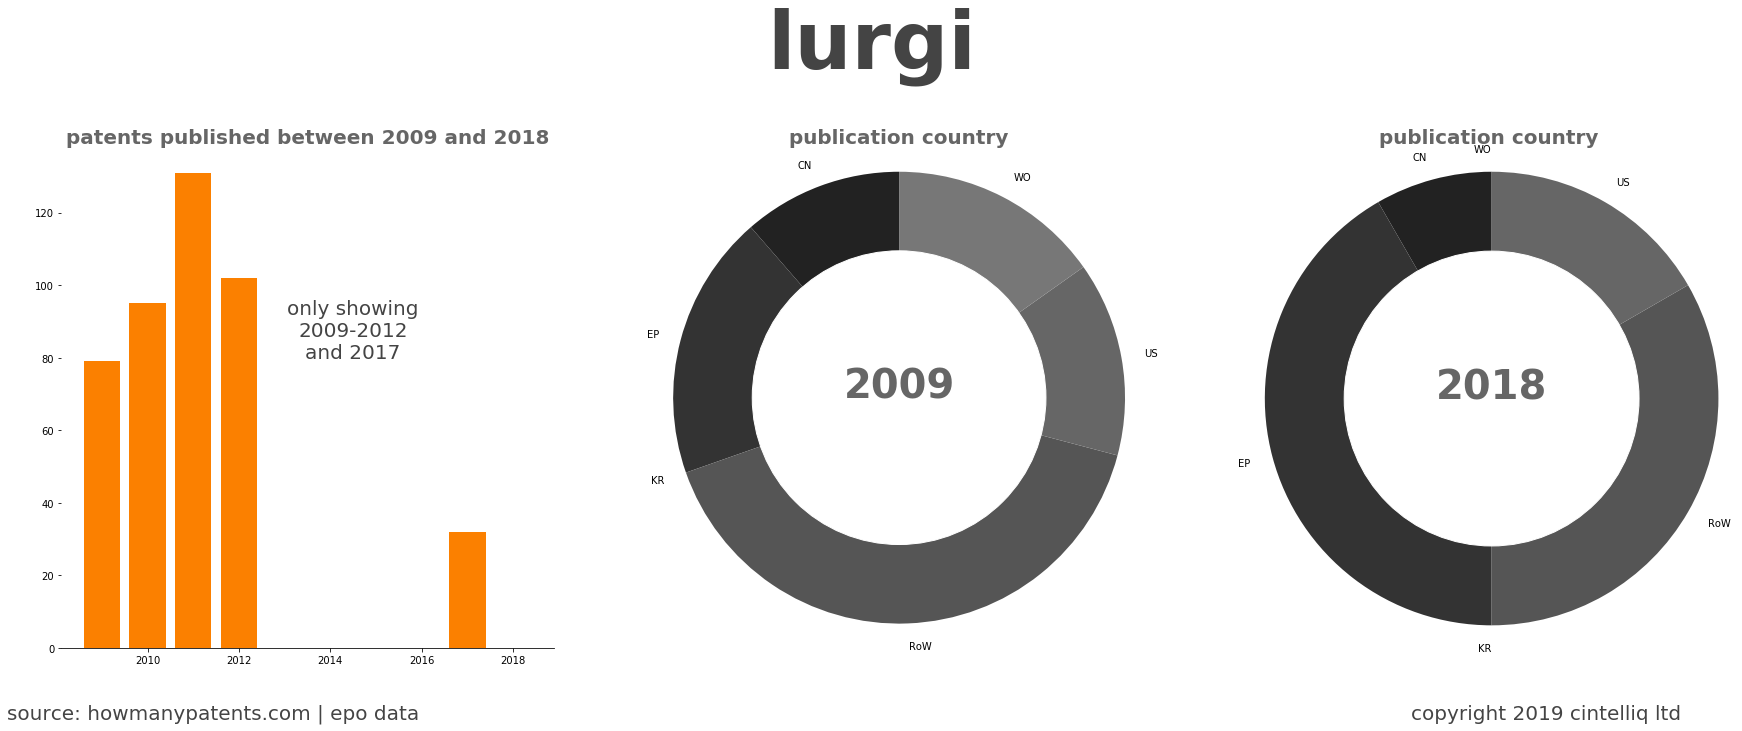 summary of patents for Lurgi